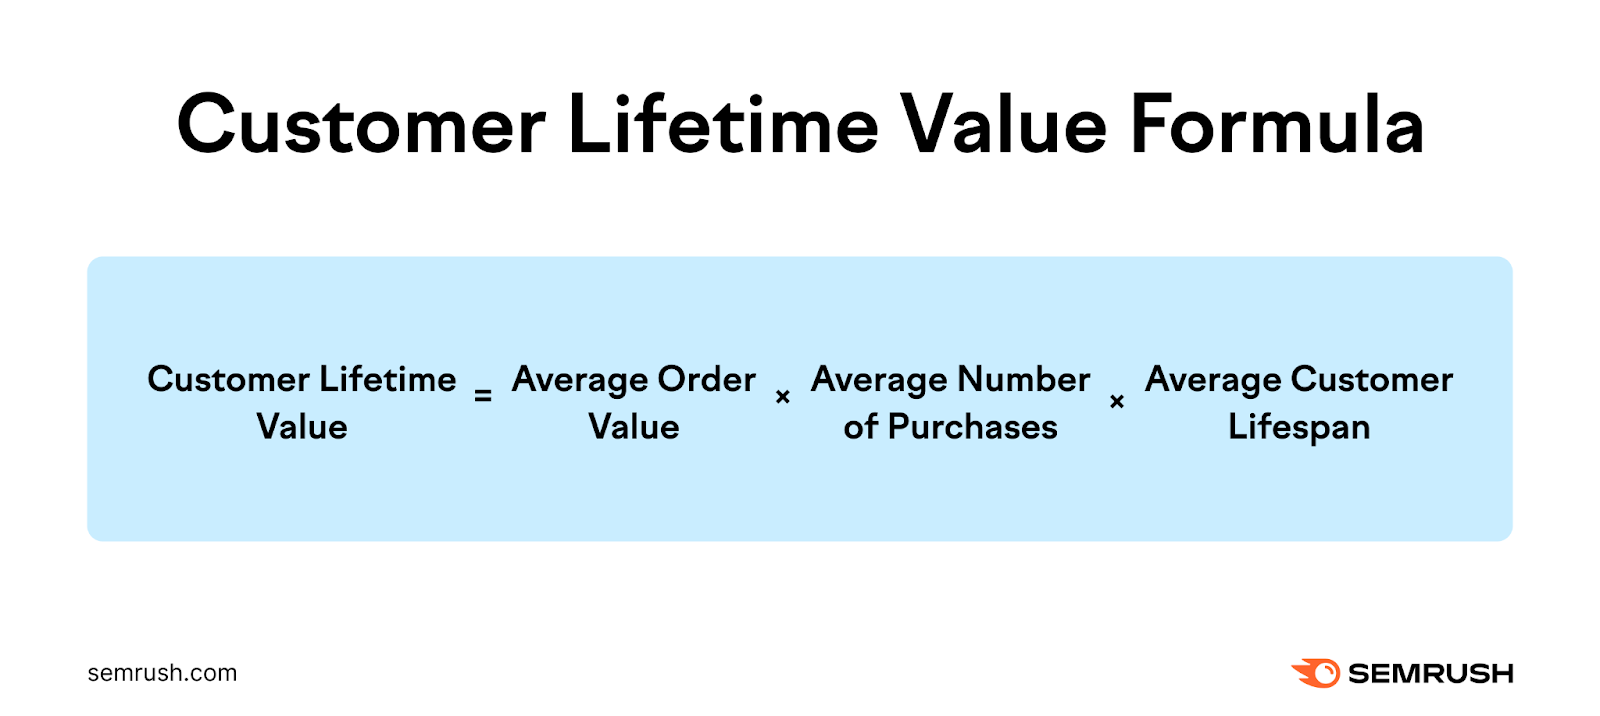 Customer lifetime value equals average order value multiplied by average number of purchases multiplied by average customer lifespan.